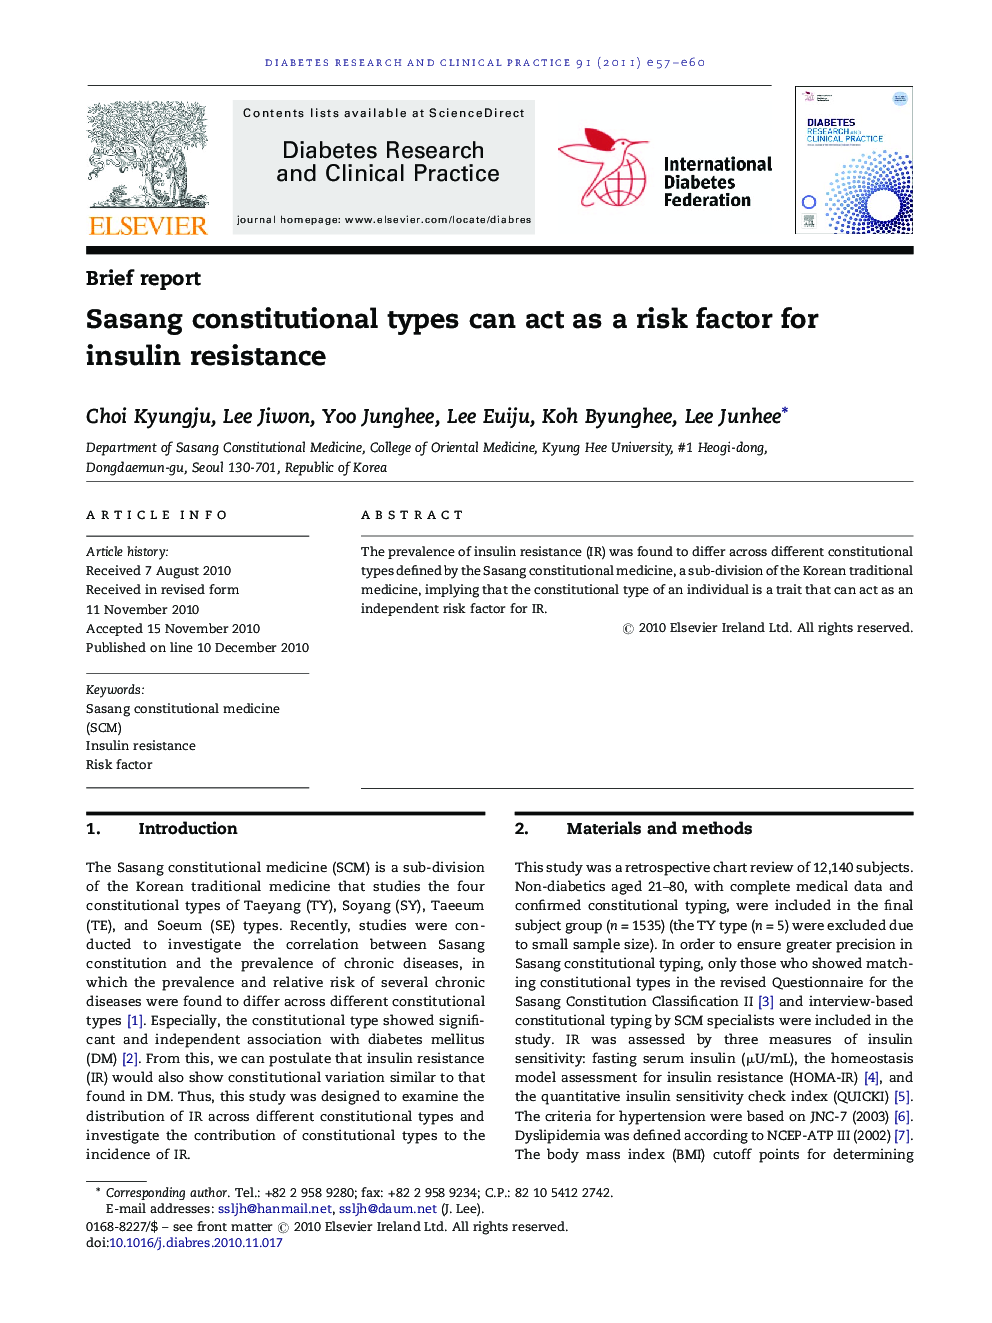 Sasang constitutional types can act as a risk factor for insulin resistance